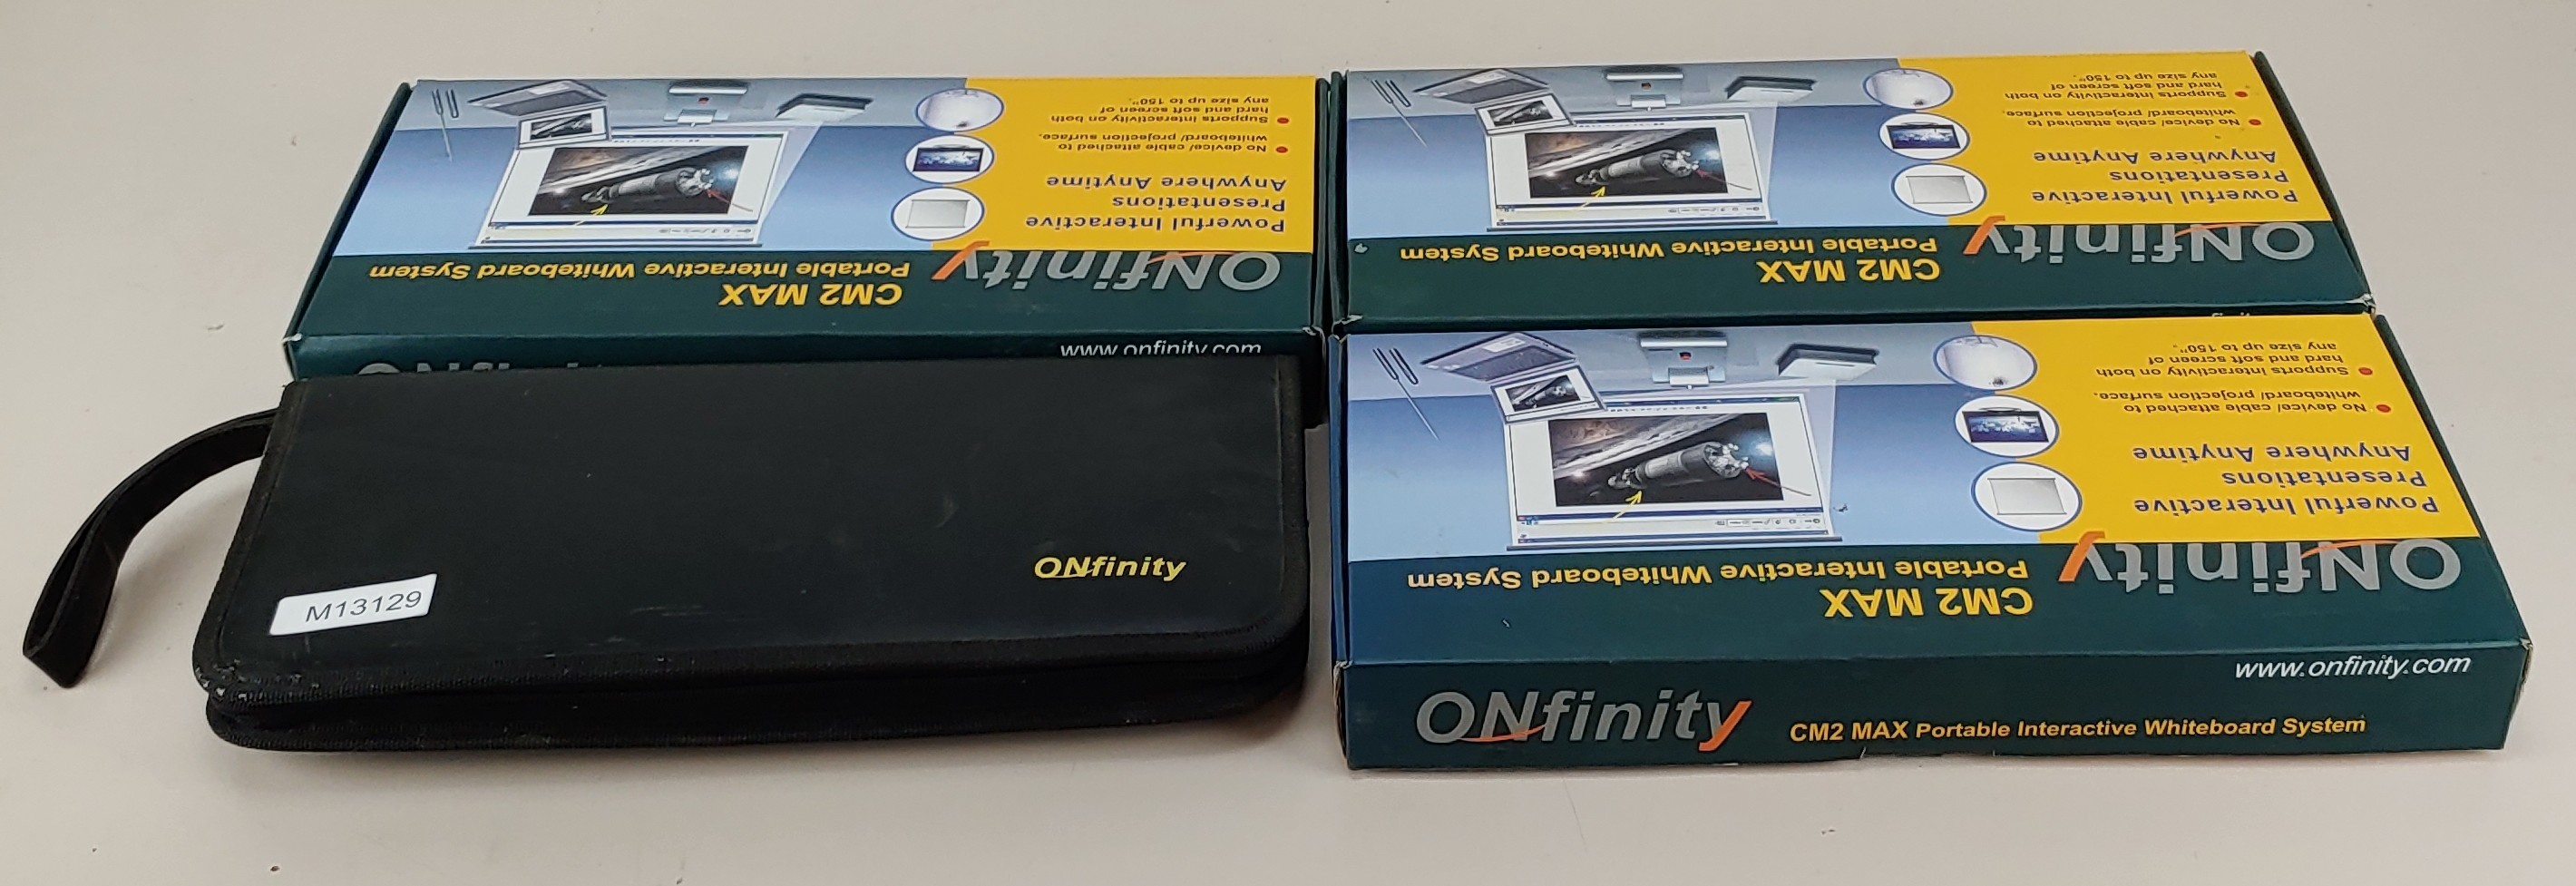 Lot of 4 ONfinity CM2 Max Portable Interactive Whiteboard System